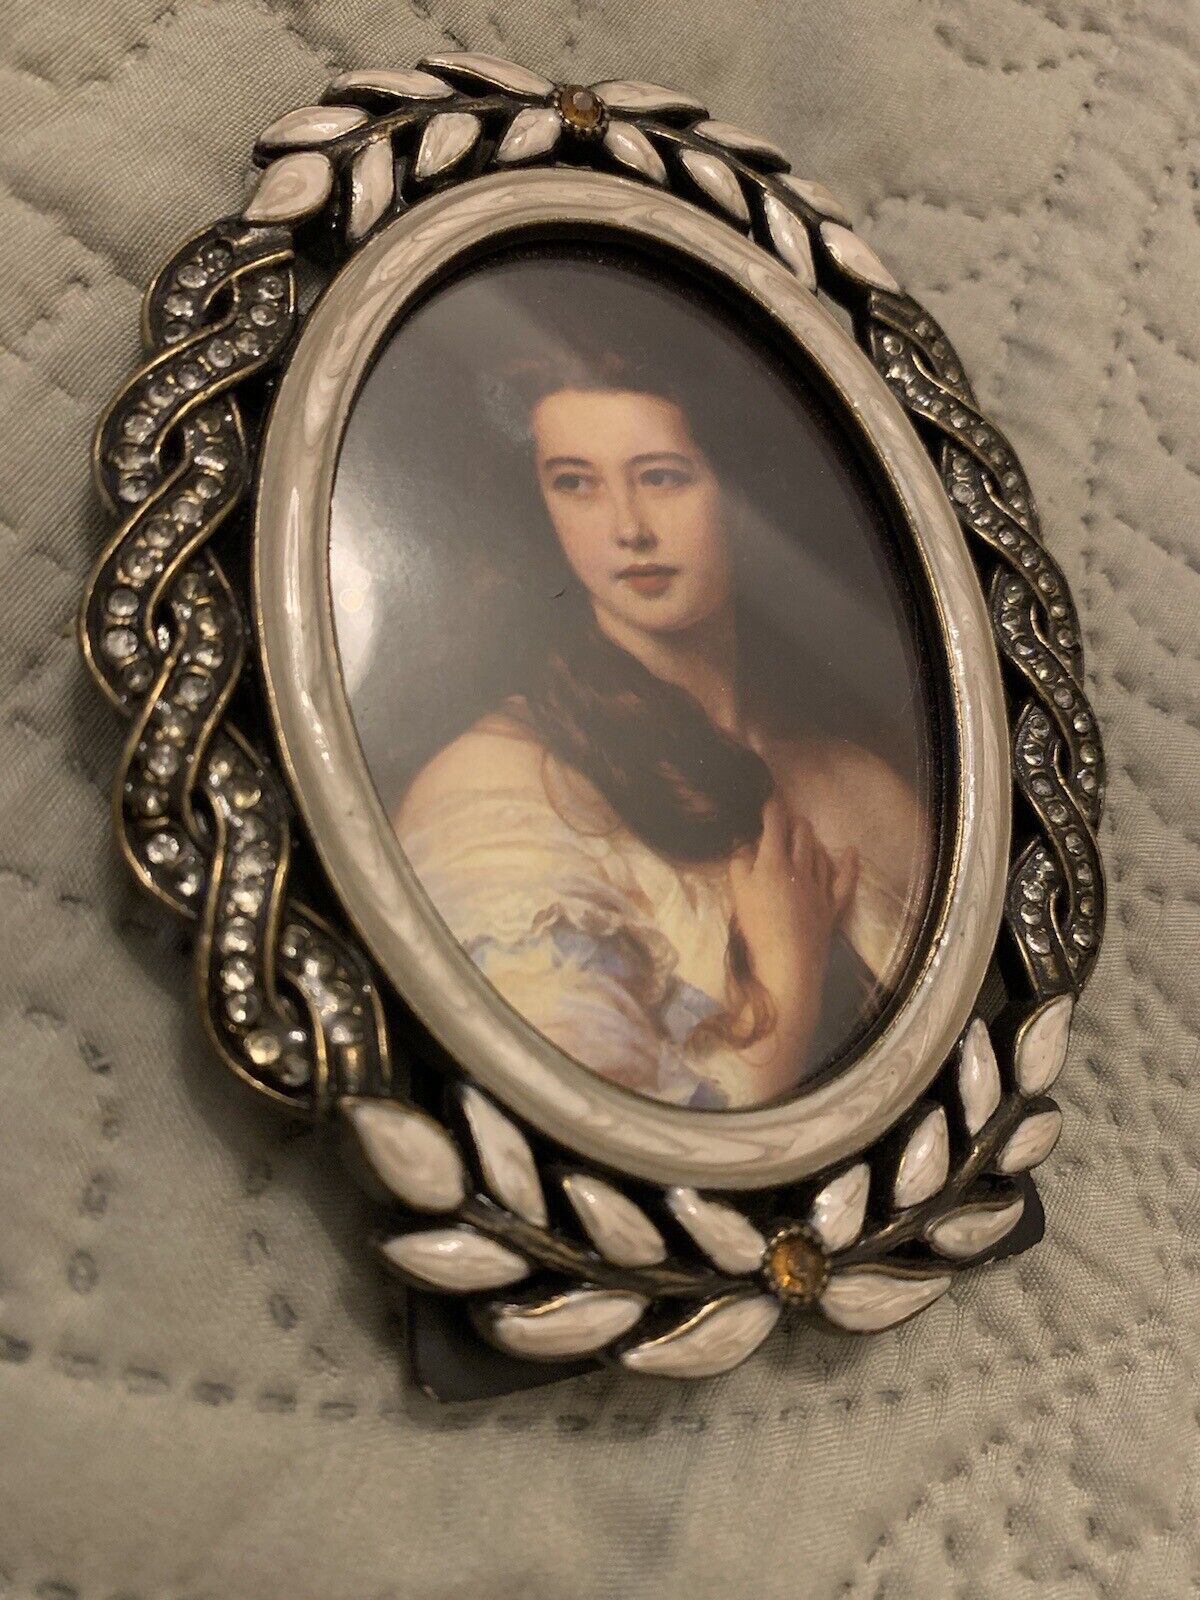 Ornate Russian 2.5”x3” Photograph Frame Metal With Enamel And Jewels - Oval